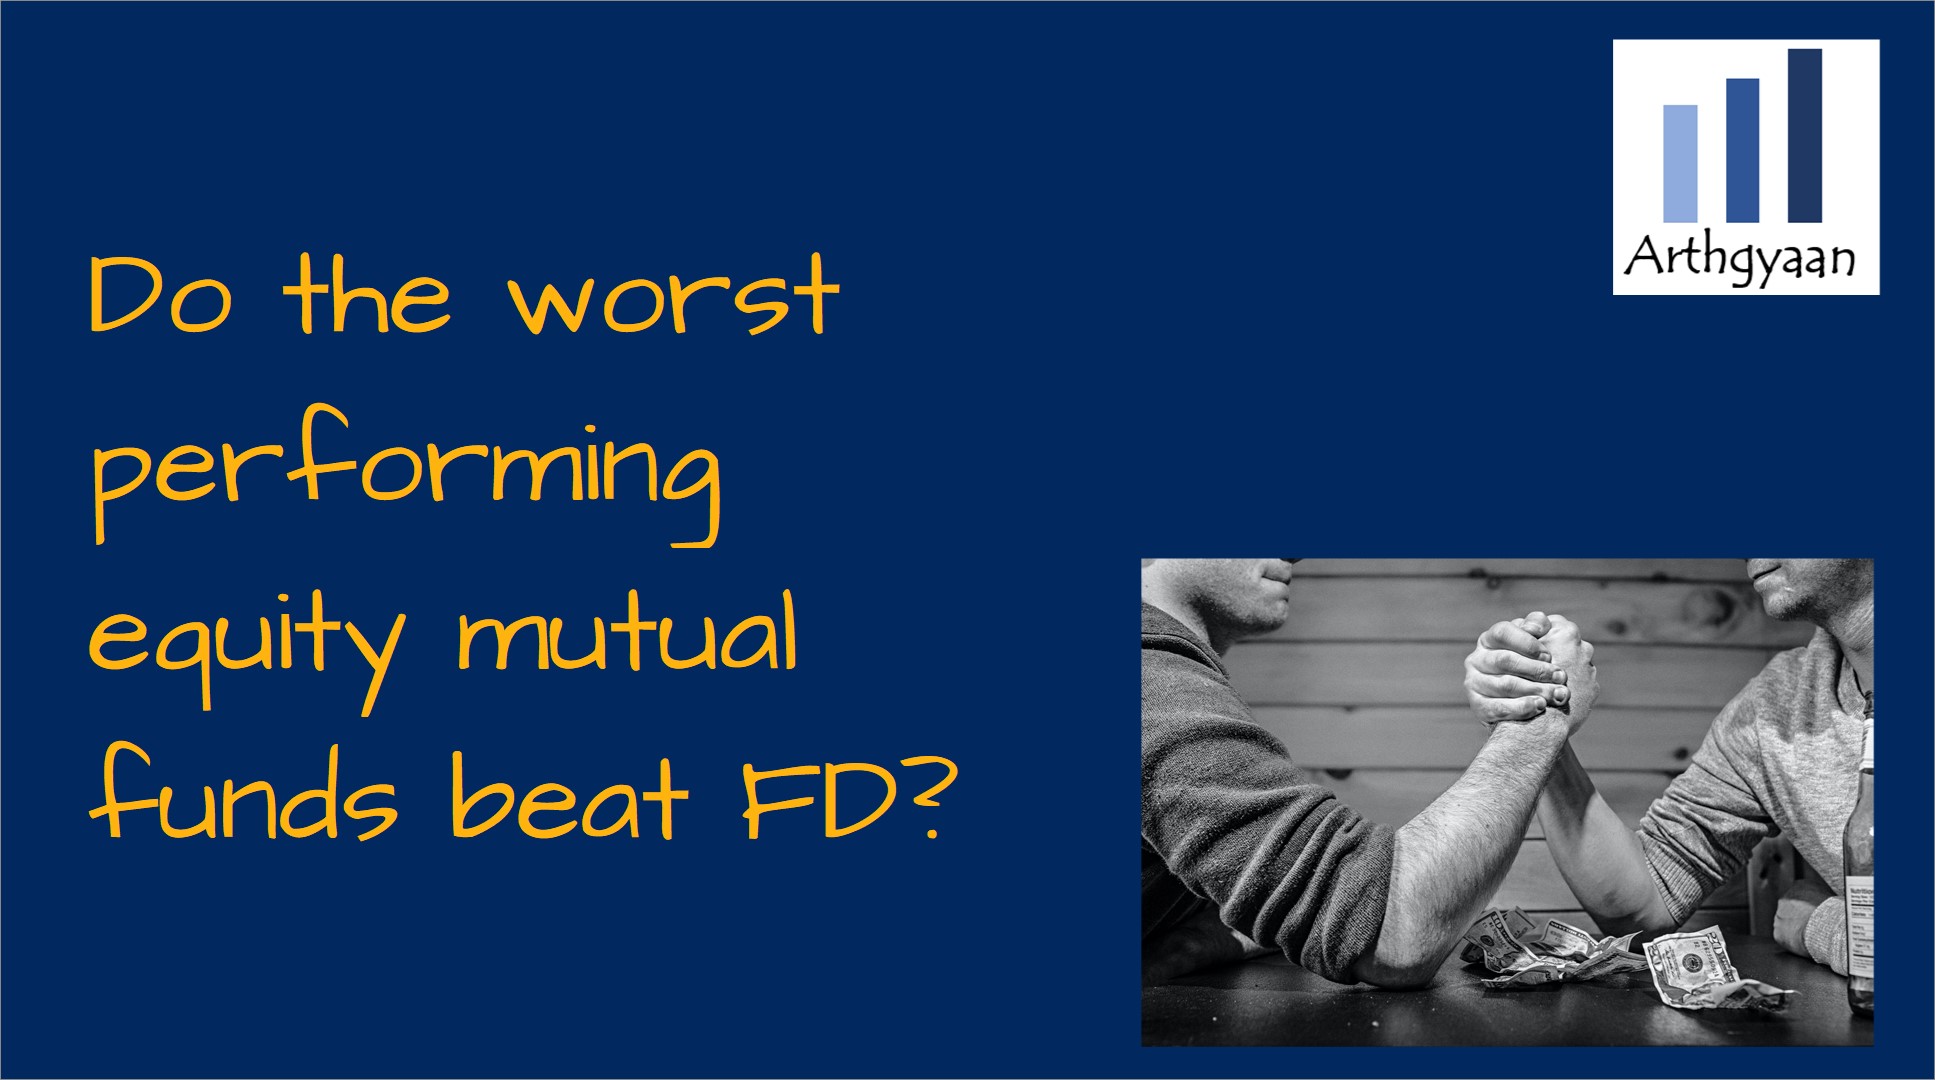 Do the worst performing equity mutual funds beat FD?